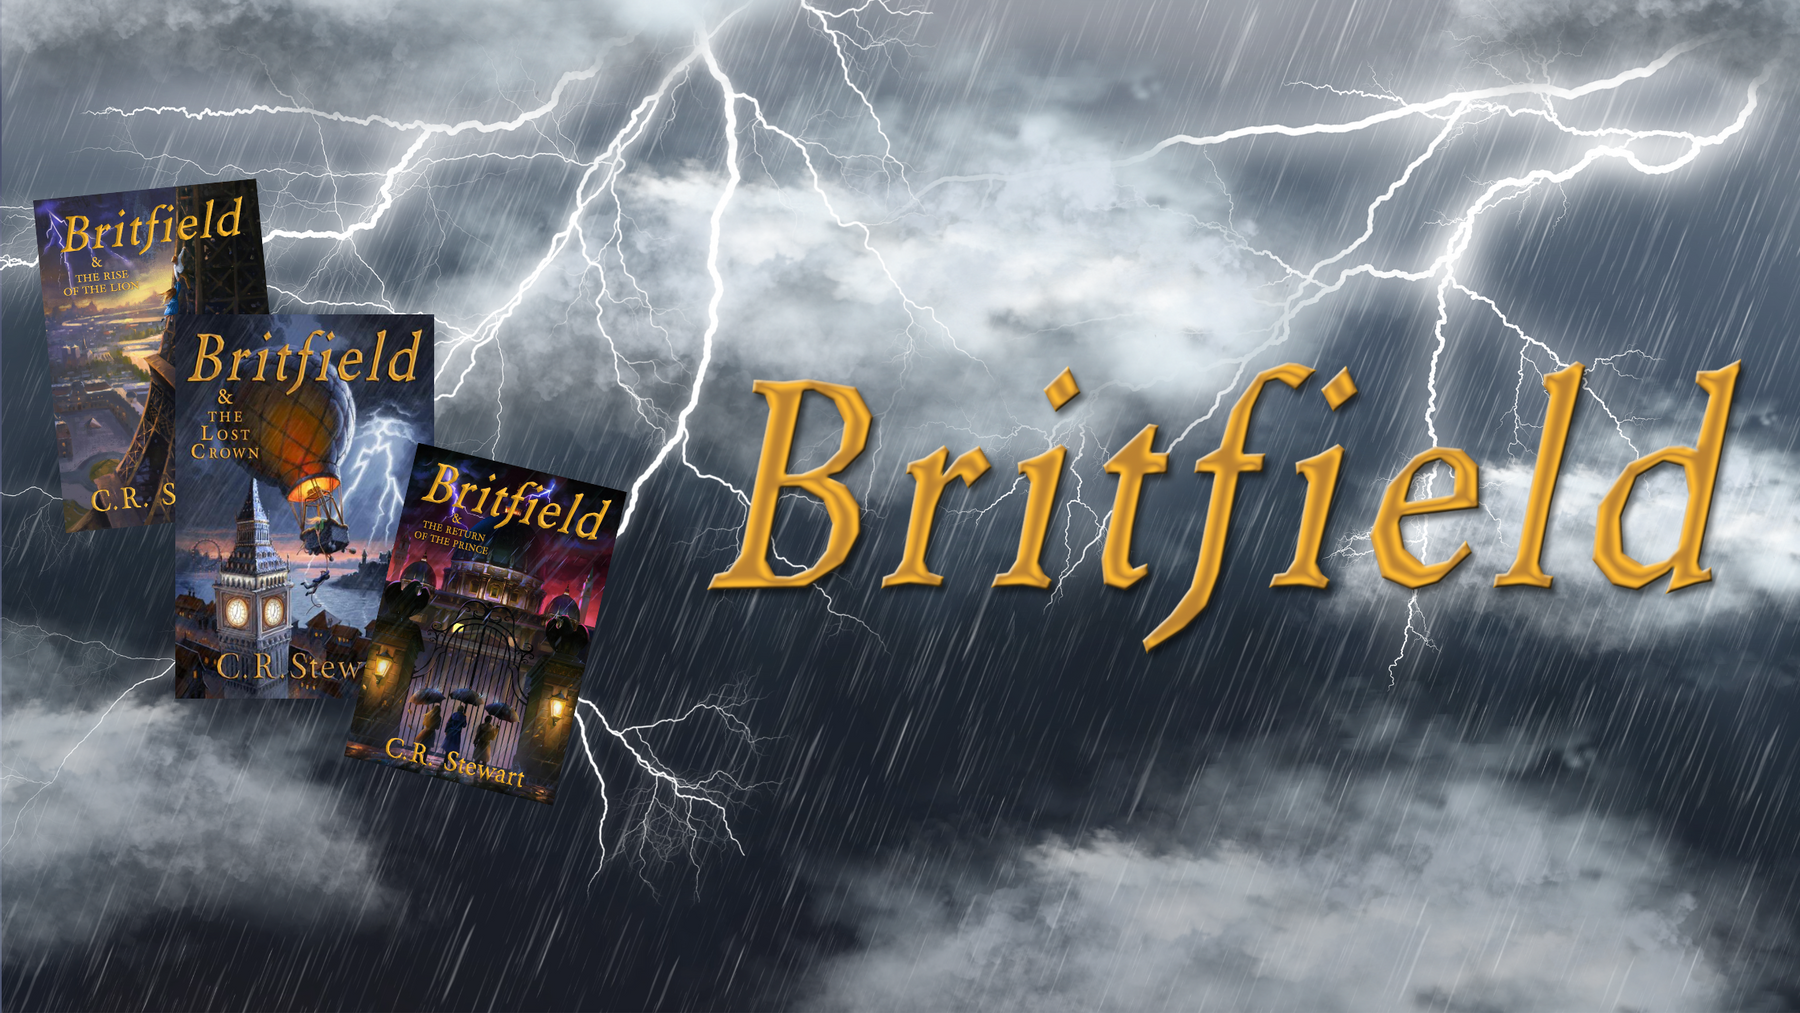 Welcome to the World of Britfield